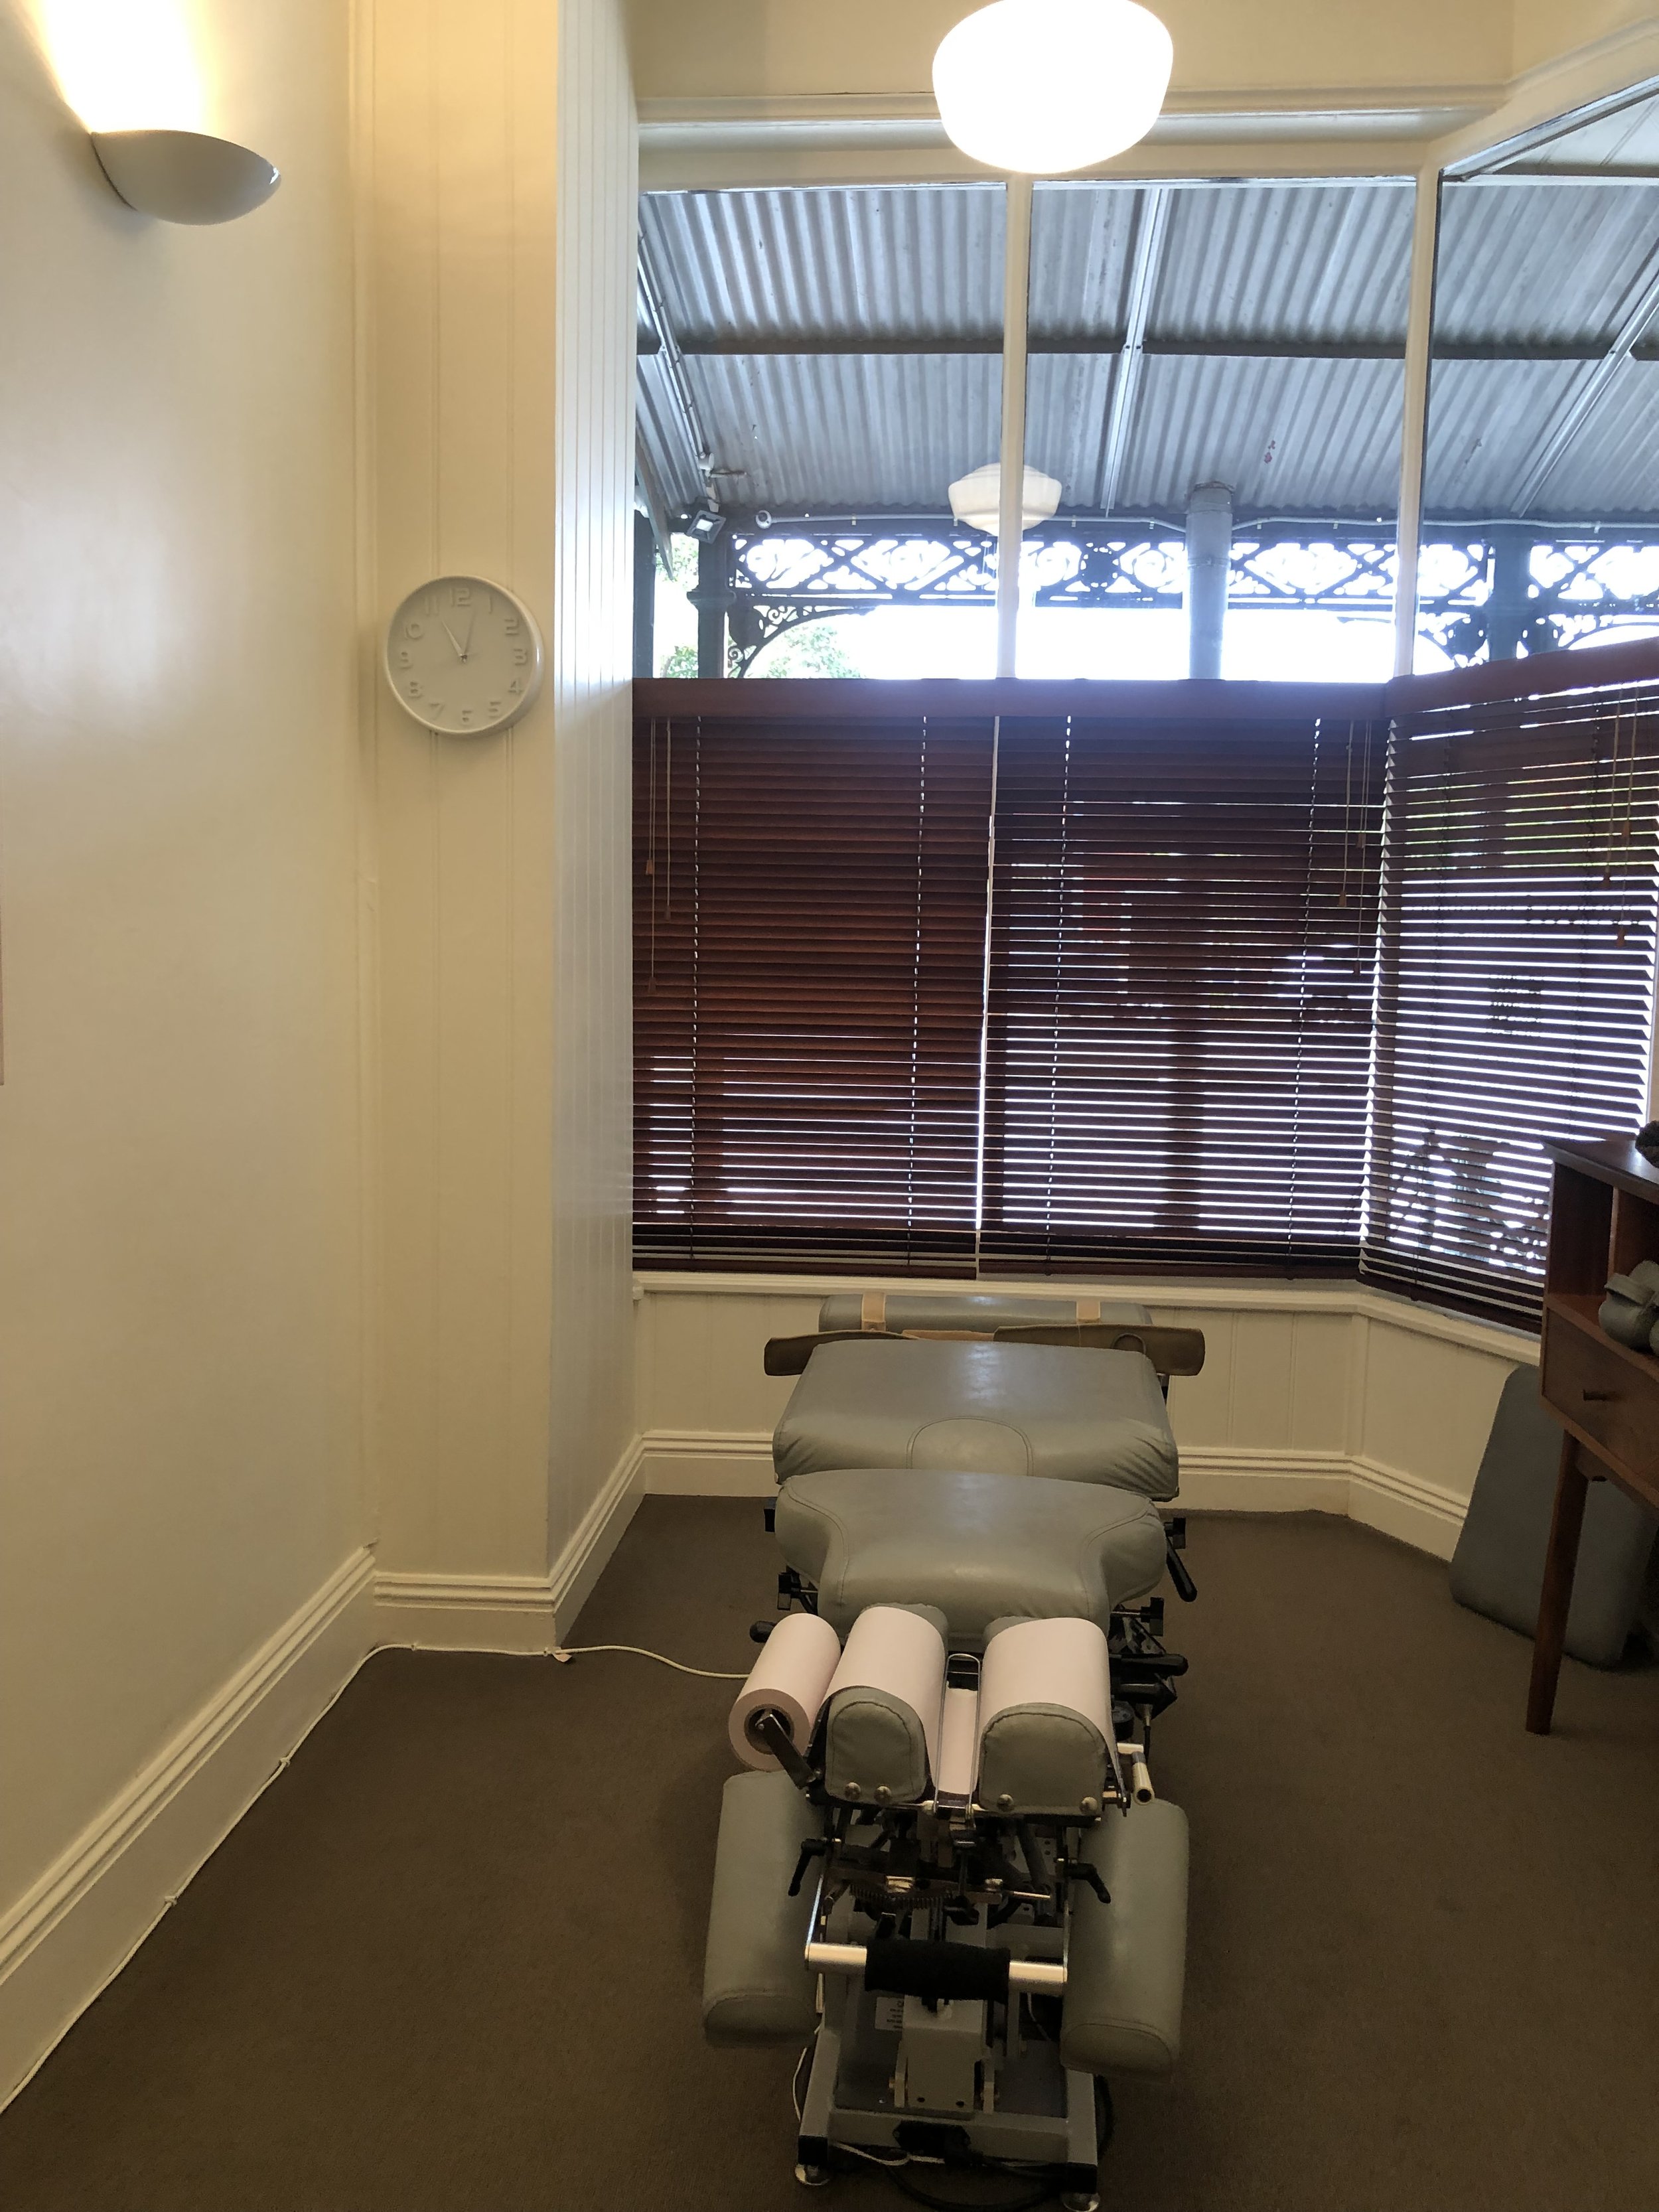 A specialised table used for treating back pain issues at our melb practice